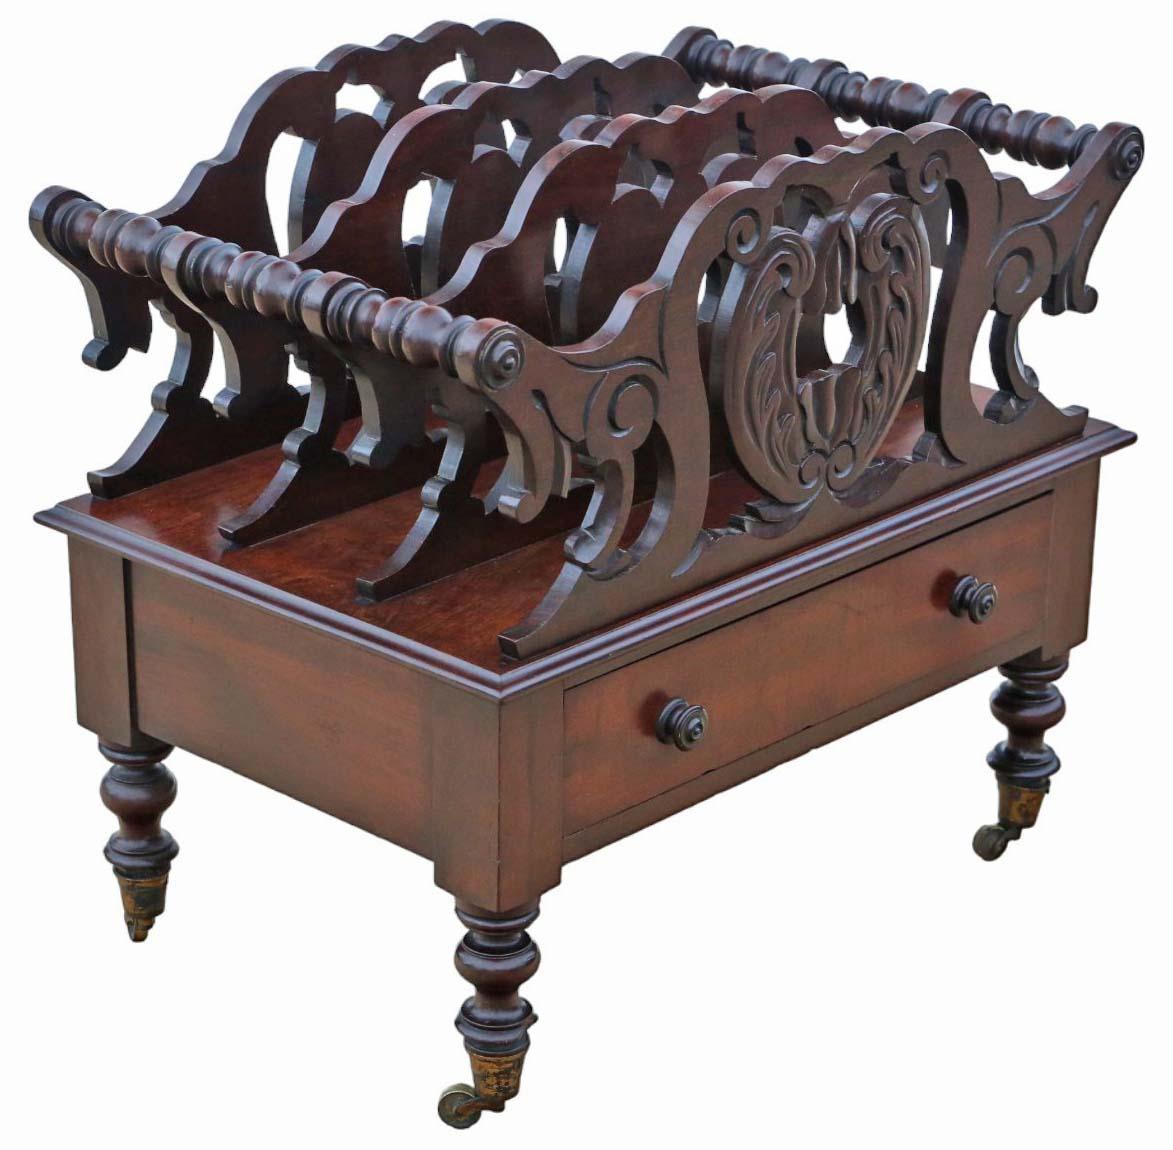 Introducing a remarkable 19th Century Mahogany Canterbury Magazine Rack, boasting exquisite craftsmanship and timeless elegance.

This charming piece is brimming with age, charm, and character, standing gracefully on period ormolu brass castors. Its